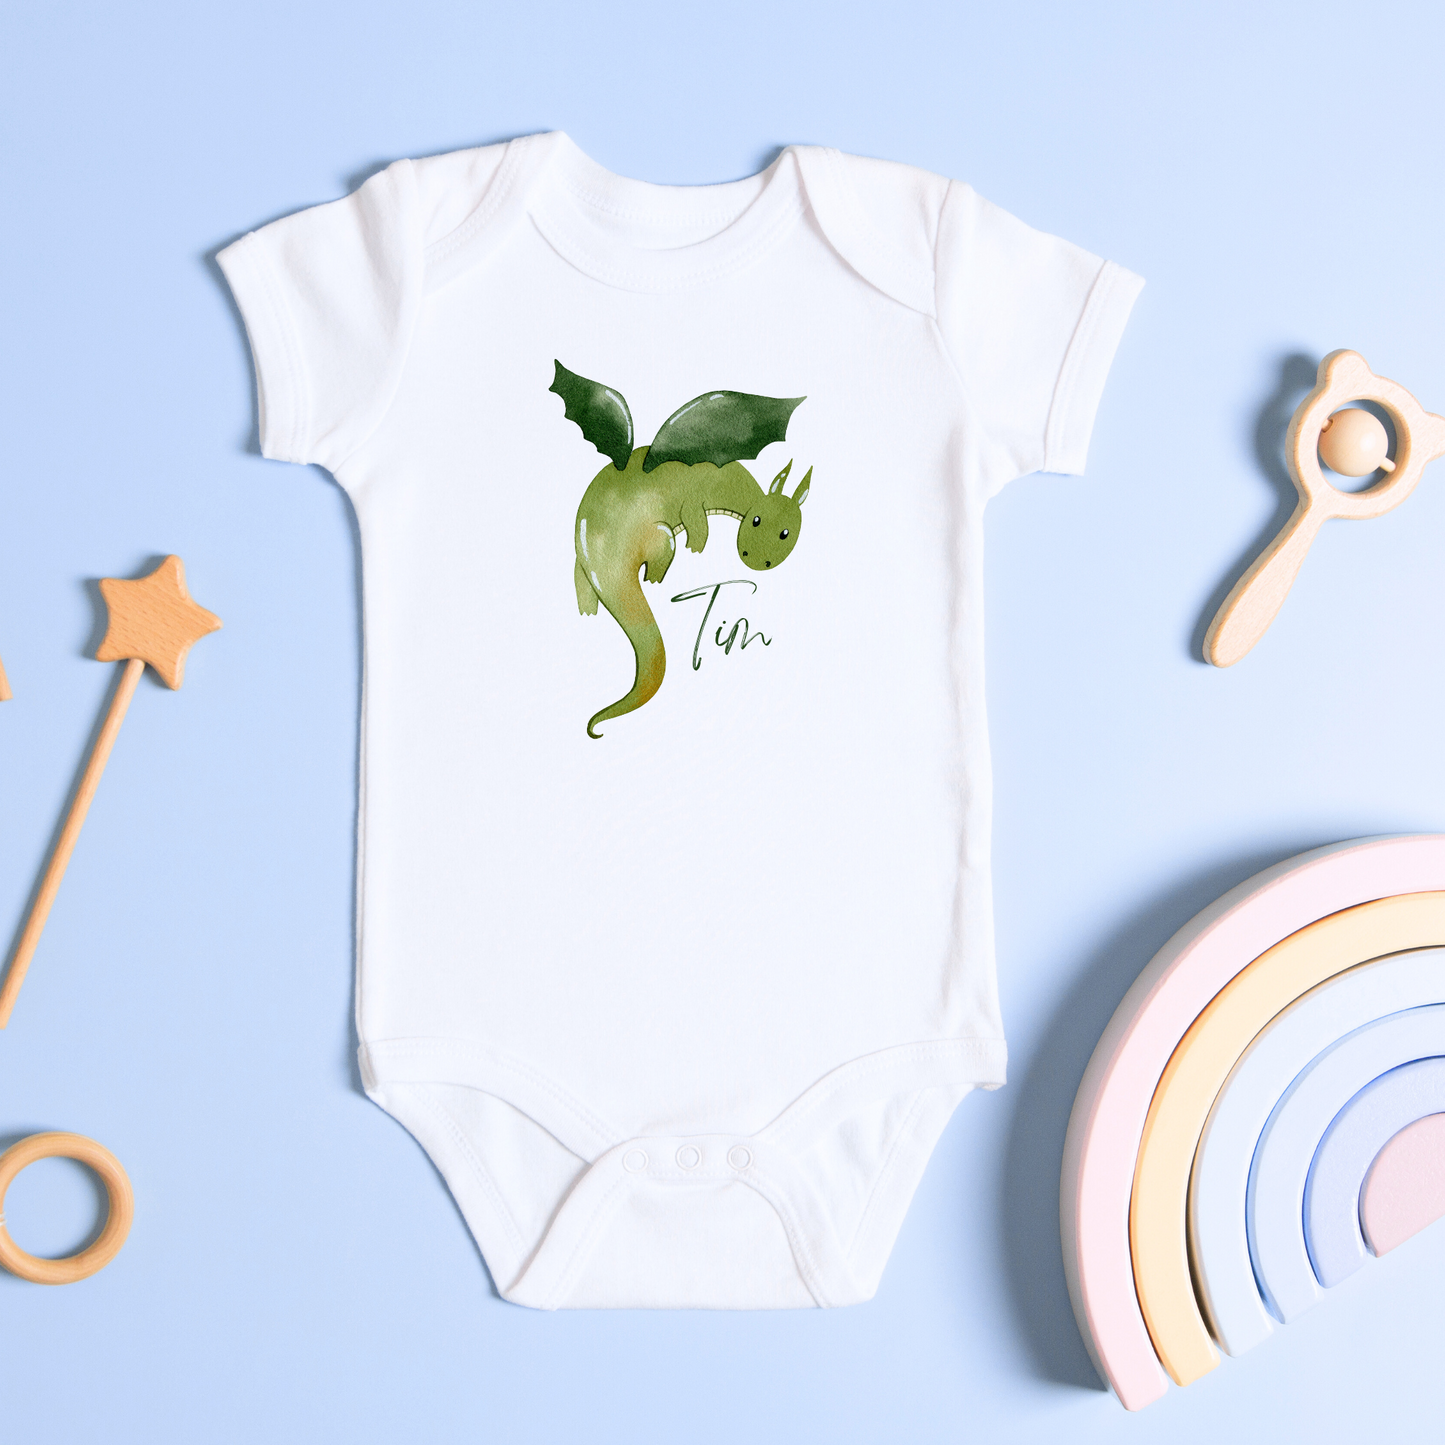 Breathe Fire in Style: Personalized Dragon Onesie for Your Baby Boy